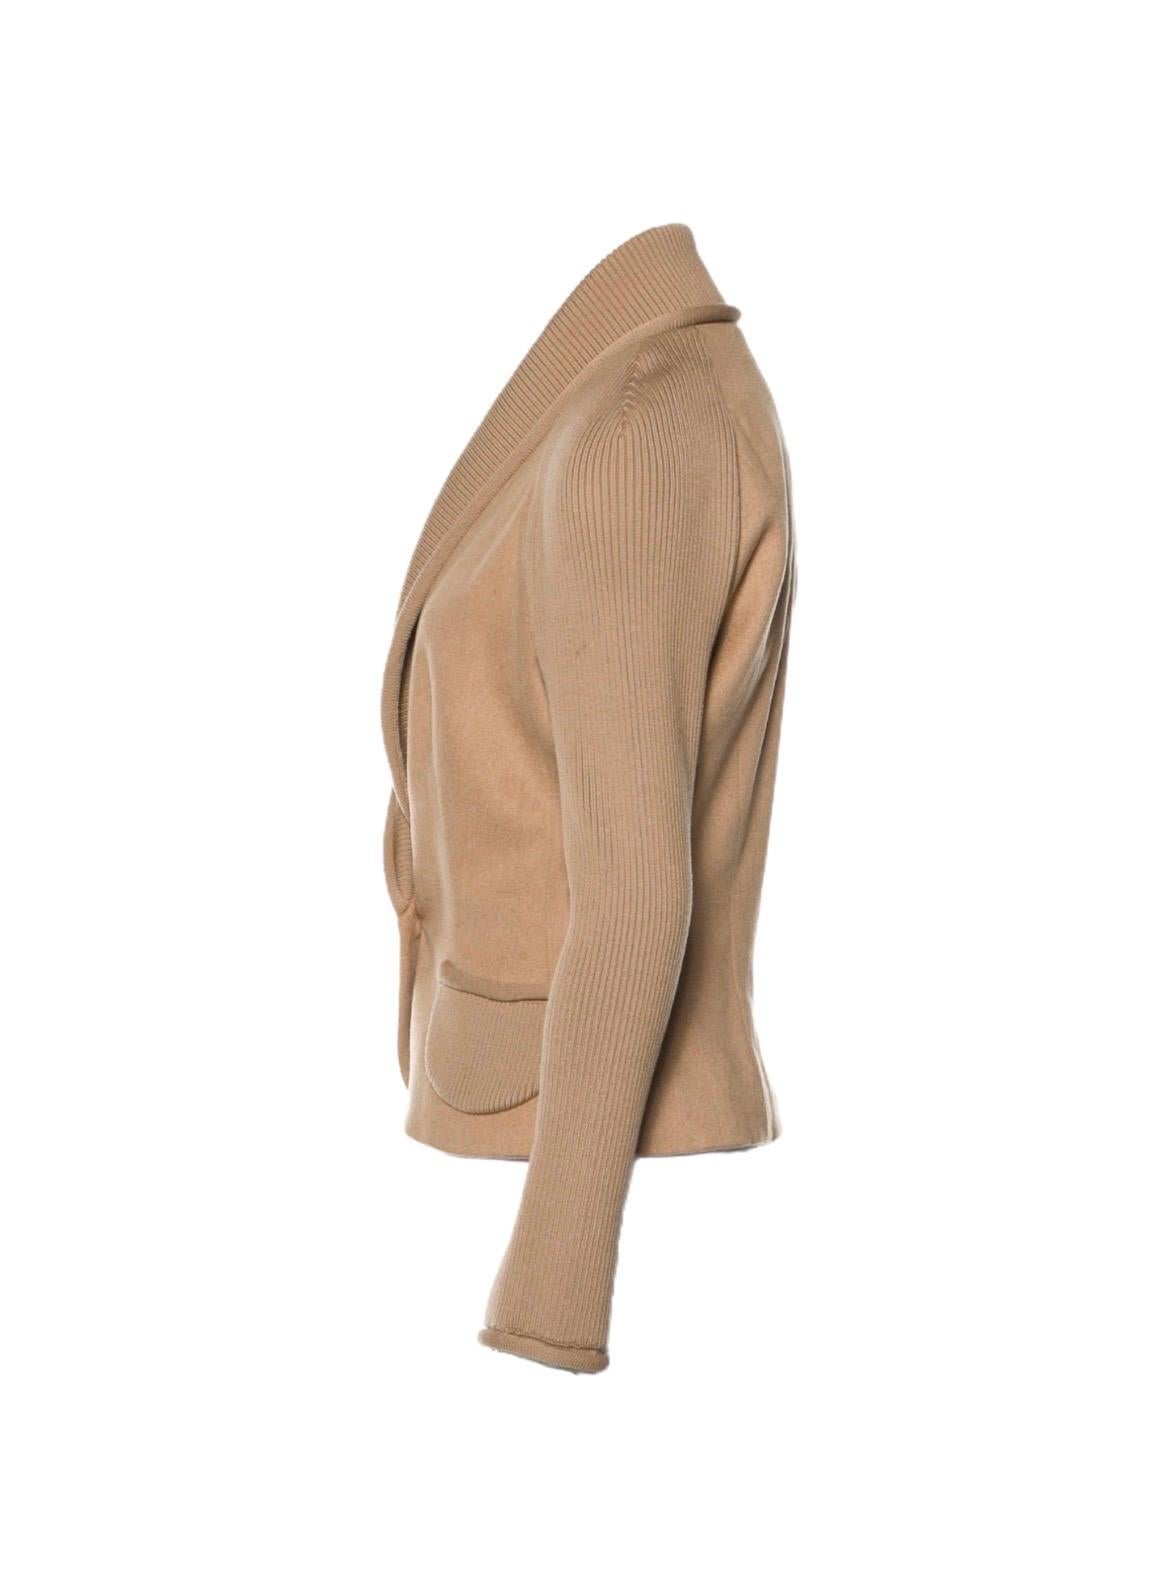 
Stunning piece designed by Christian Dior
Gorgeous jacket in a beautiful color  that matches everything
Made of finest camel hair combined with knit details
Two front pockets
Closes with front button
Beautiful silk lining, Dior „CD“ Initials